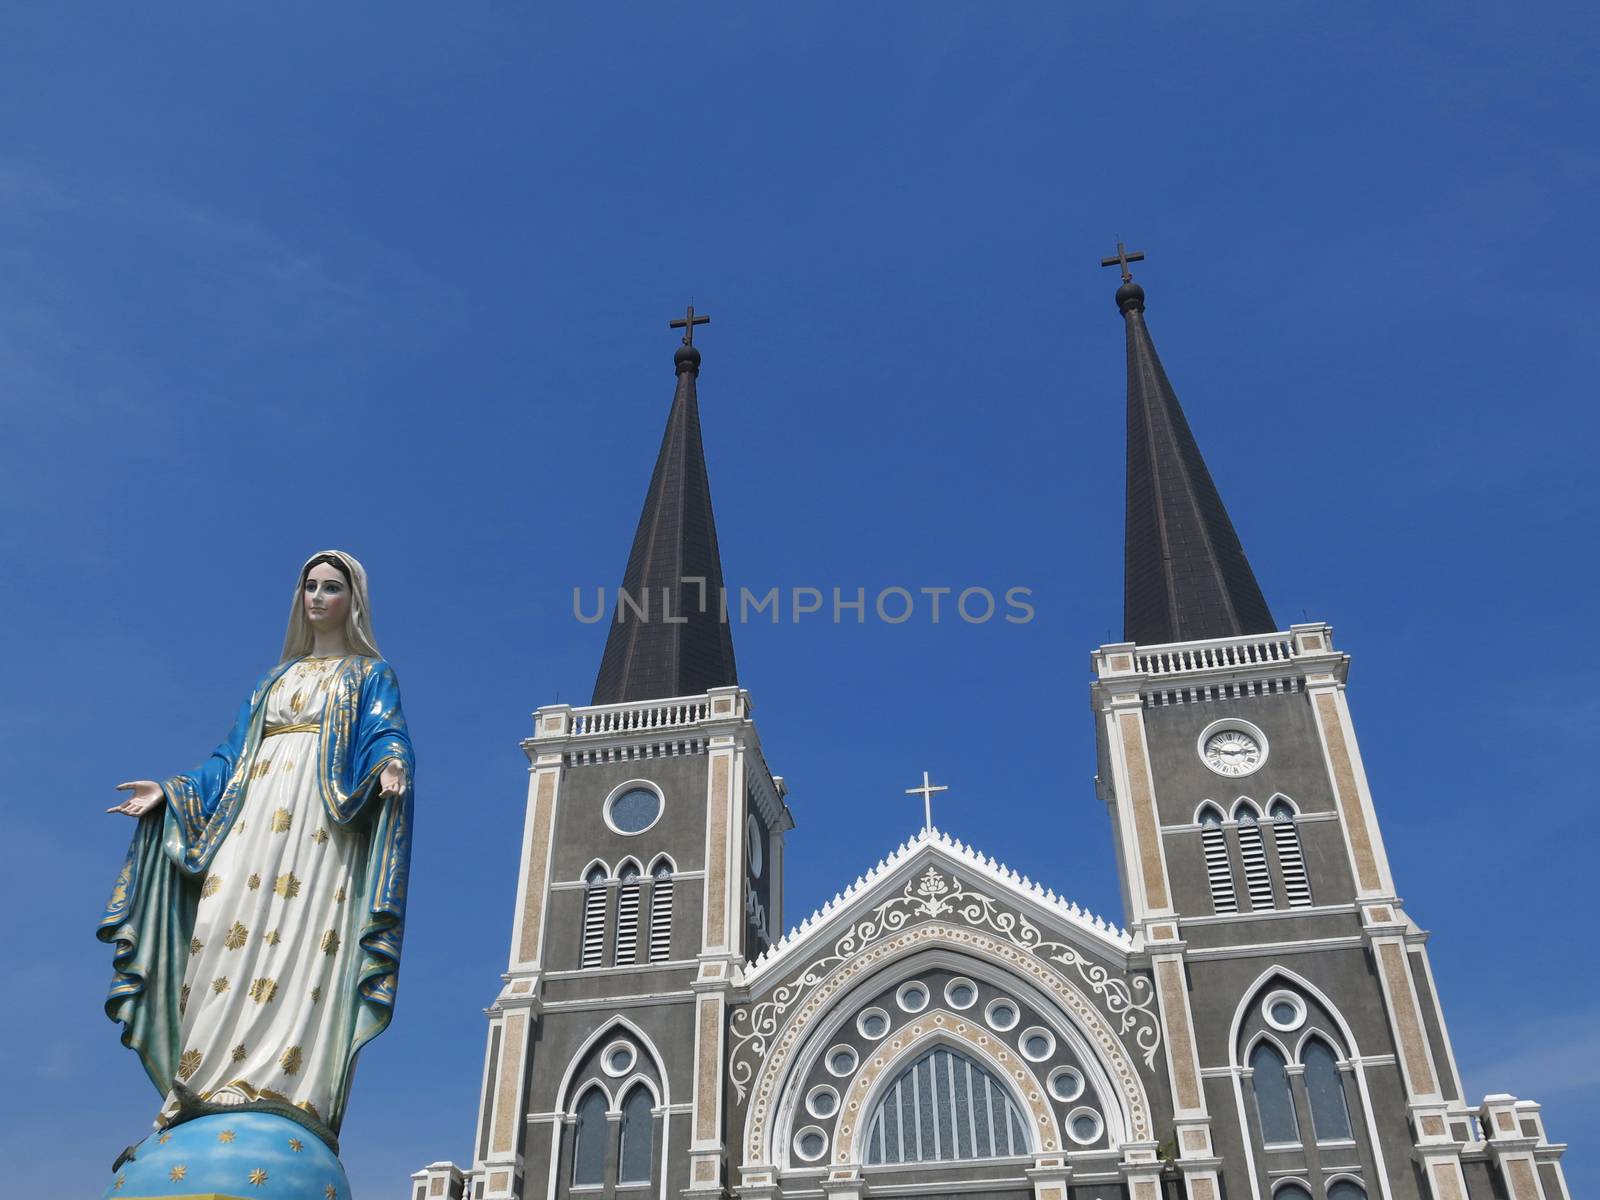 Virgin mary statue in front of church on blue sky background